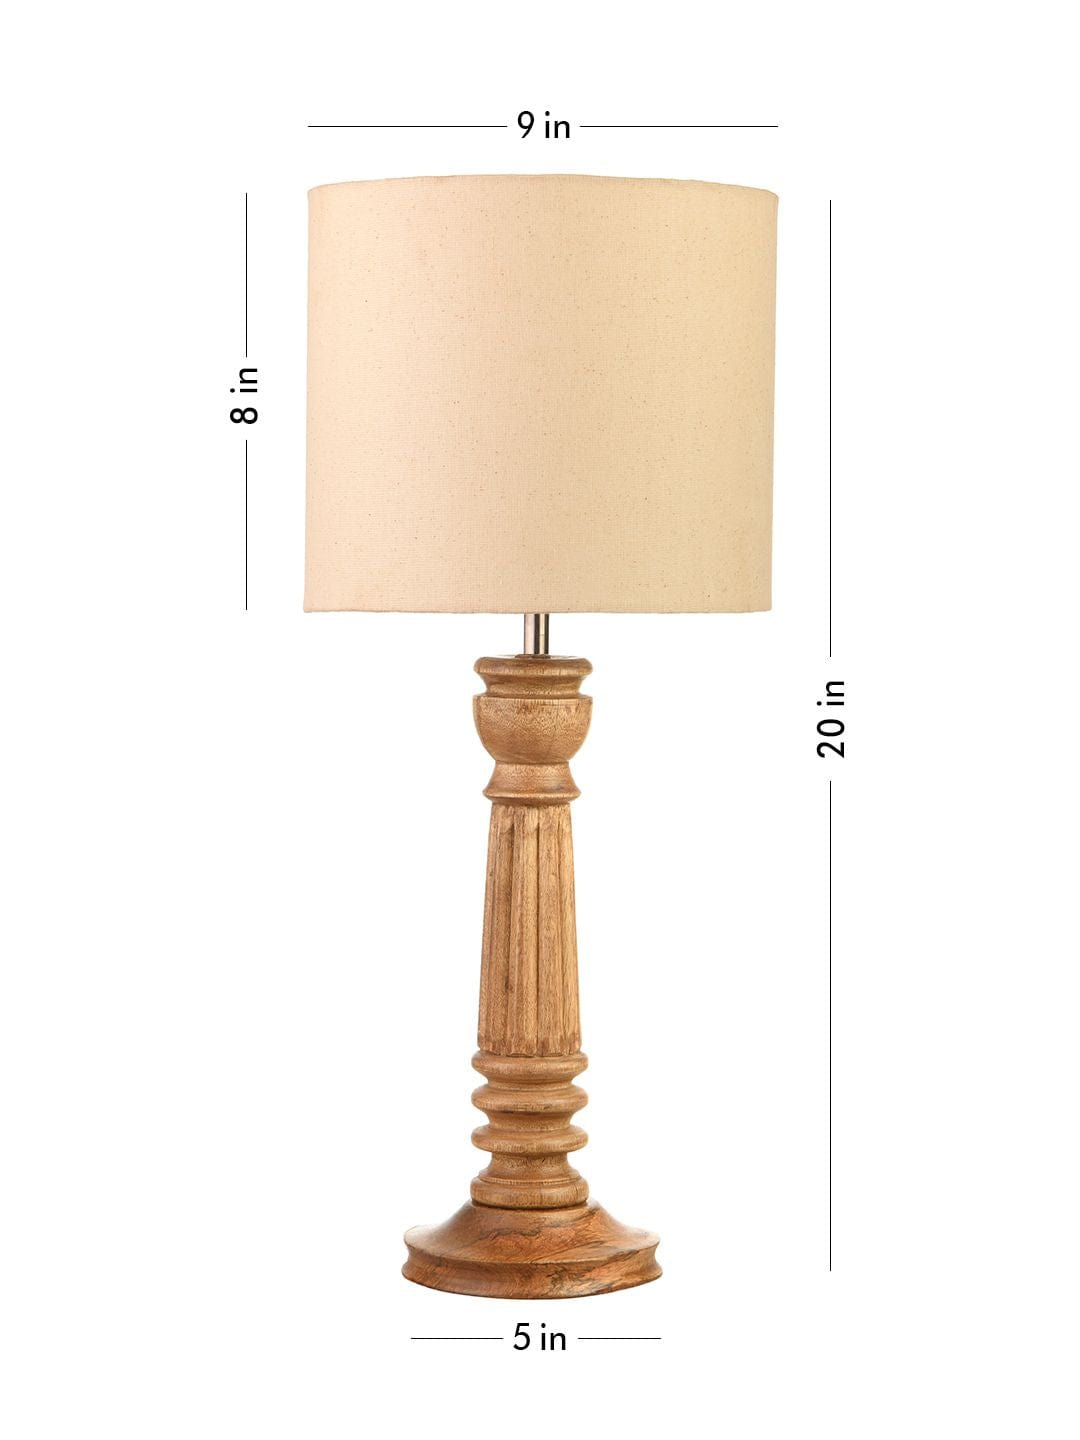 Pillar Brown Lamp with White Cotton Shade